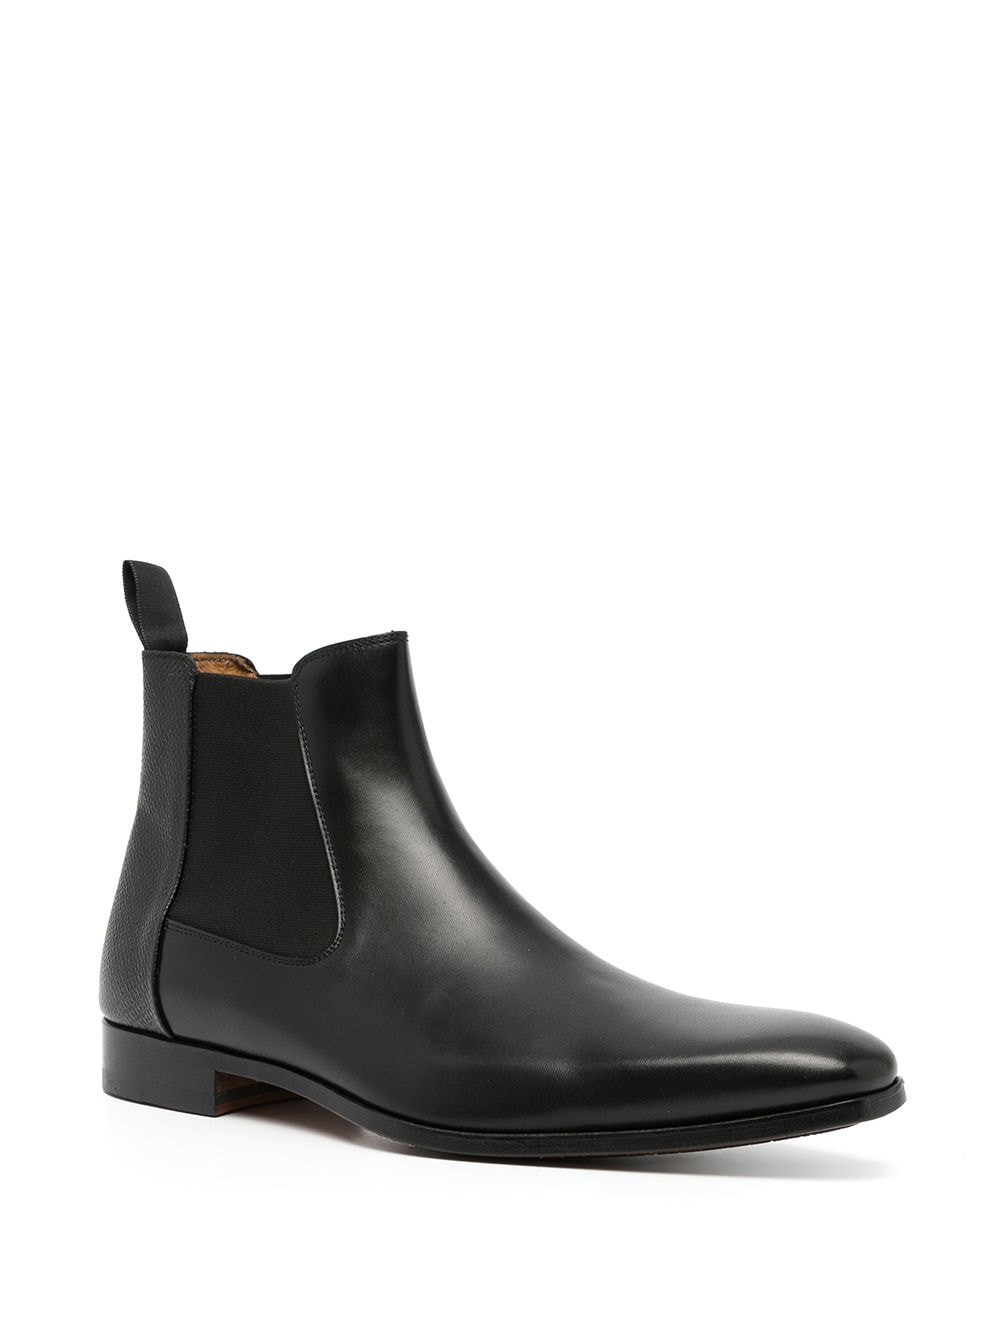 Magnanni Wind Grab Ankle Boots - Farfetch